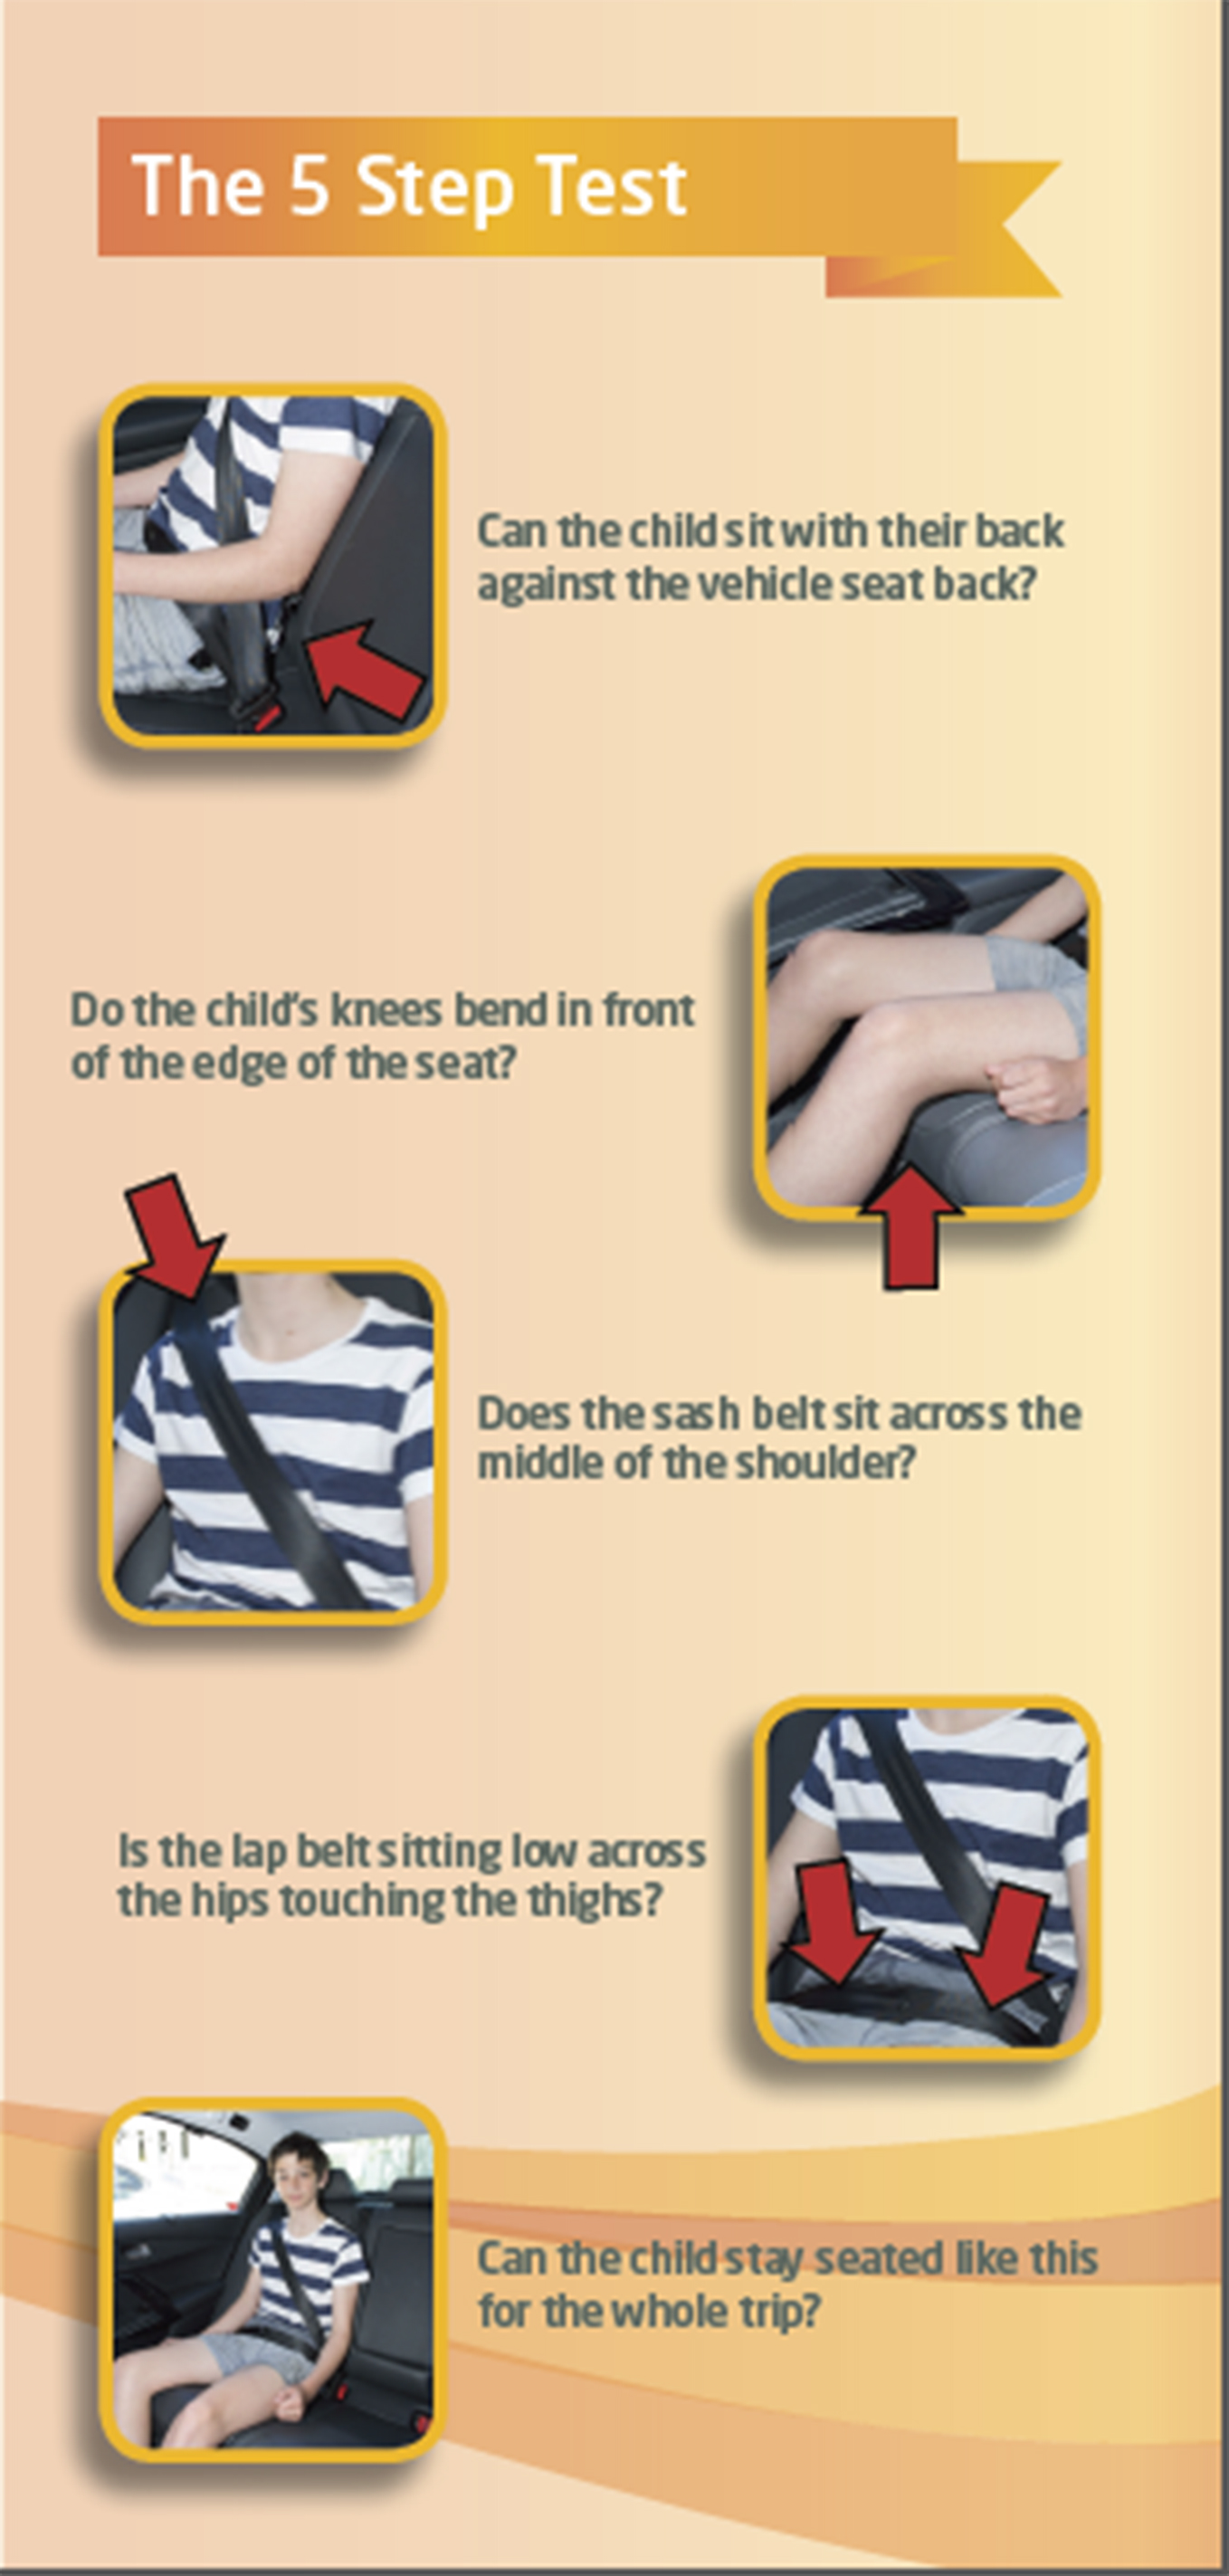 A child should only use an adult seatbelt when they are big enough to meet all parts of the '5 step test'.